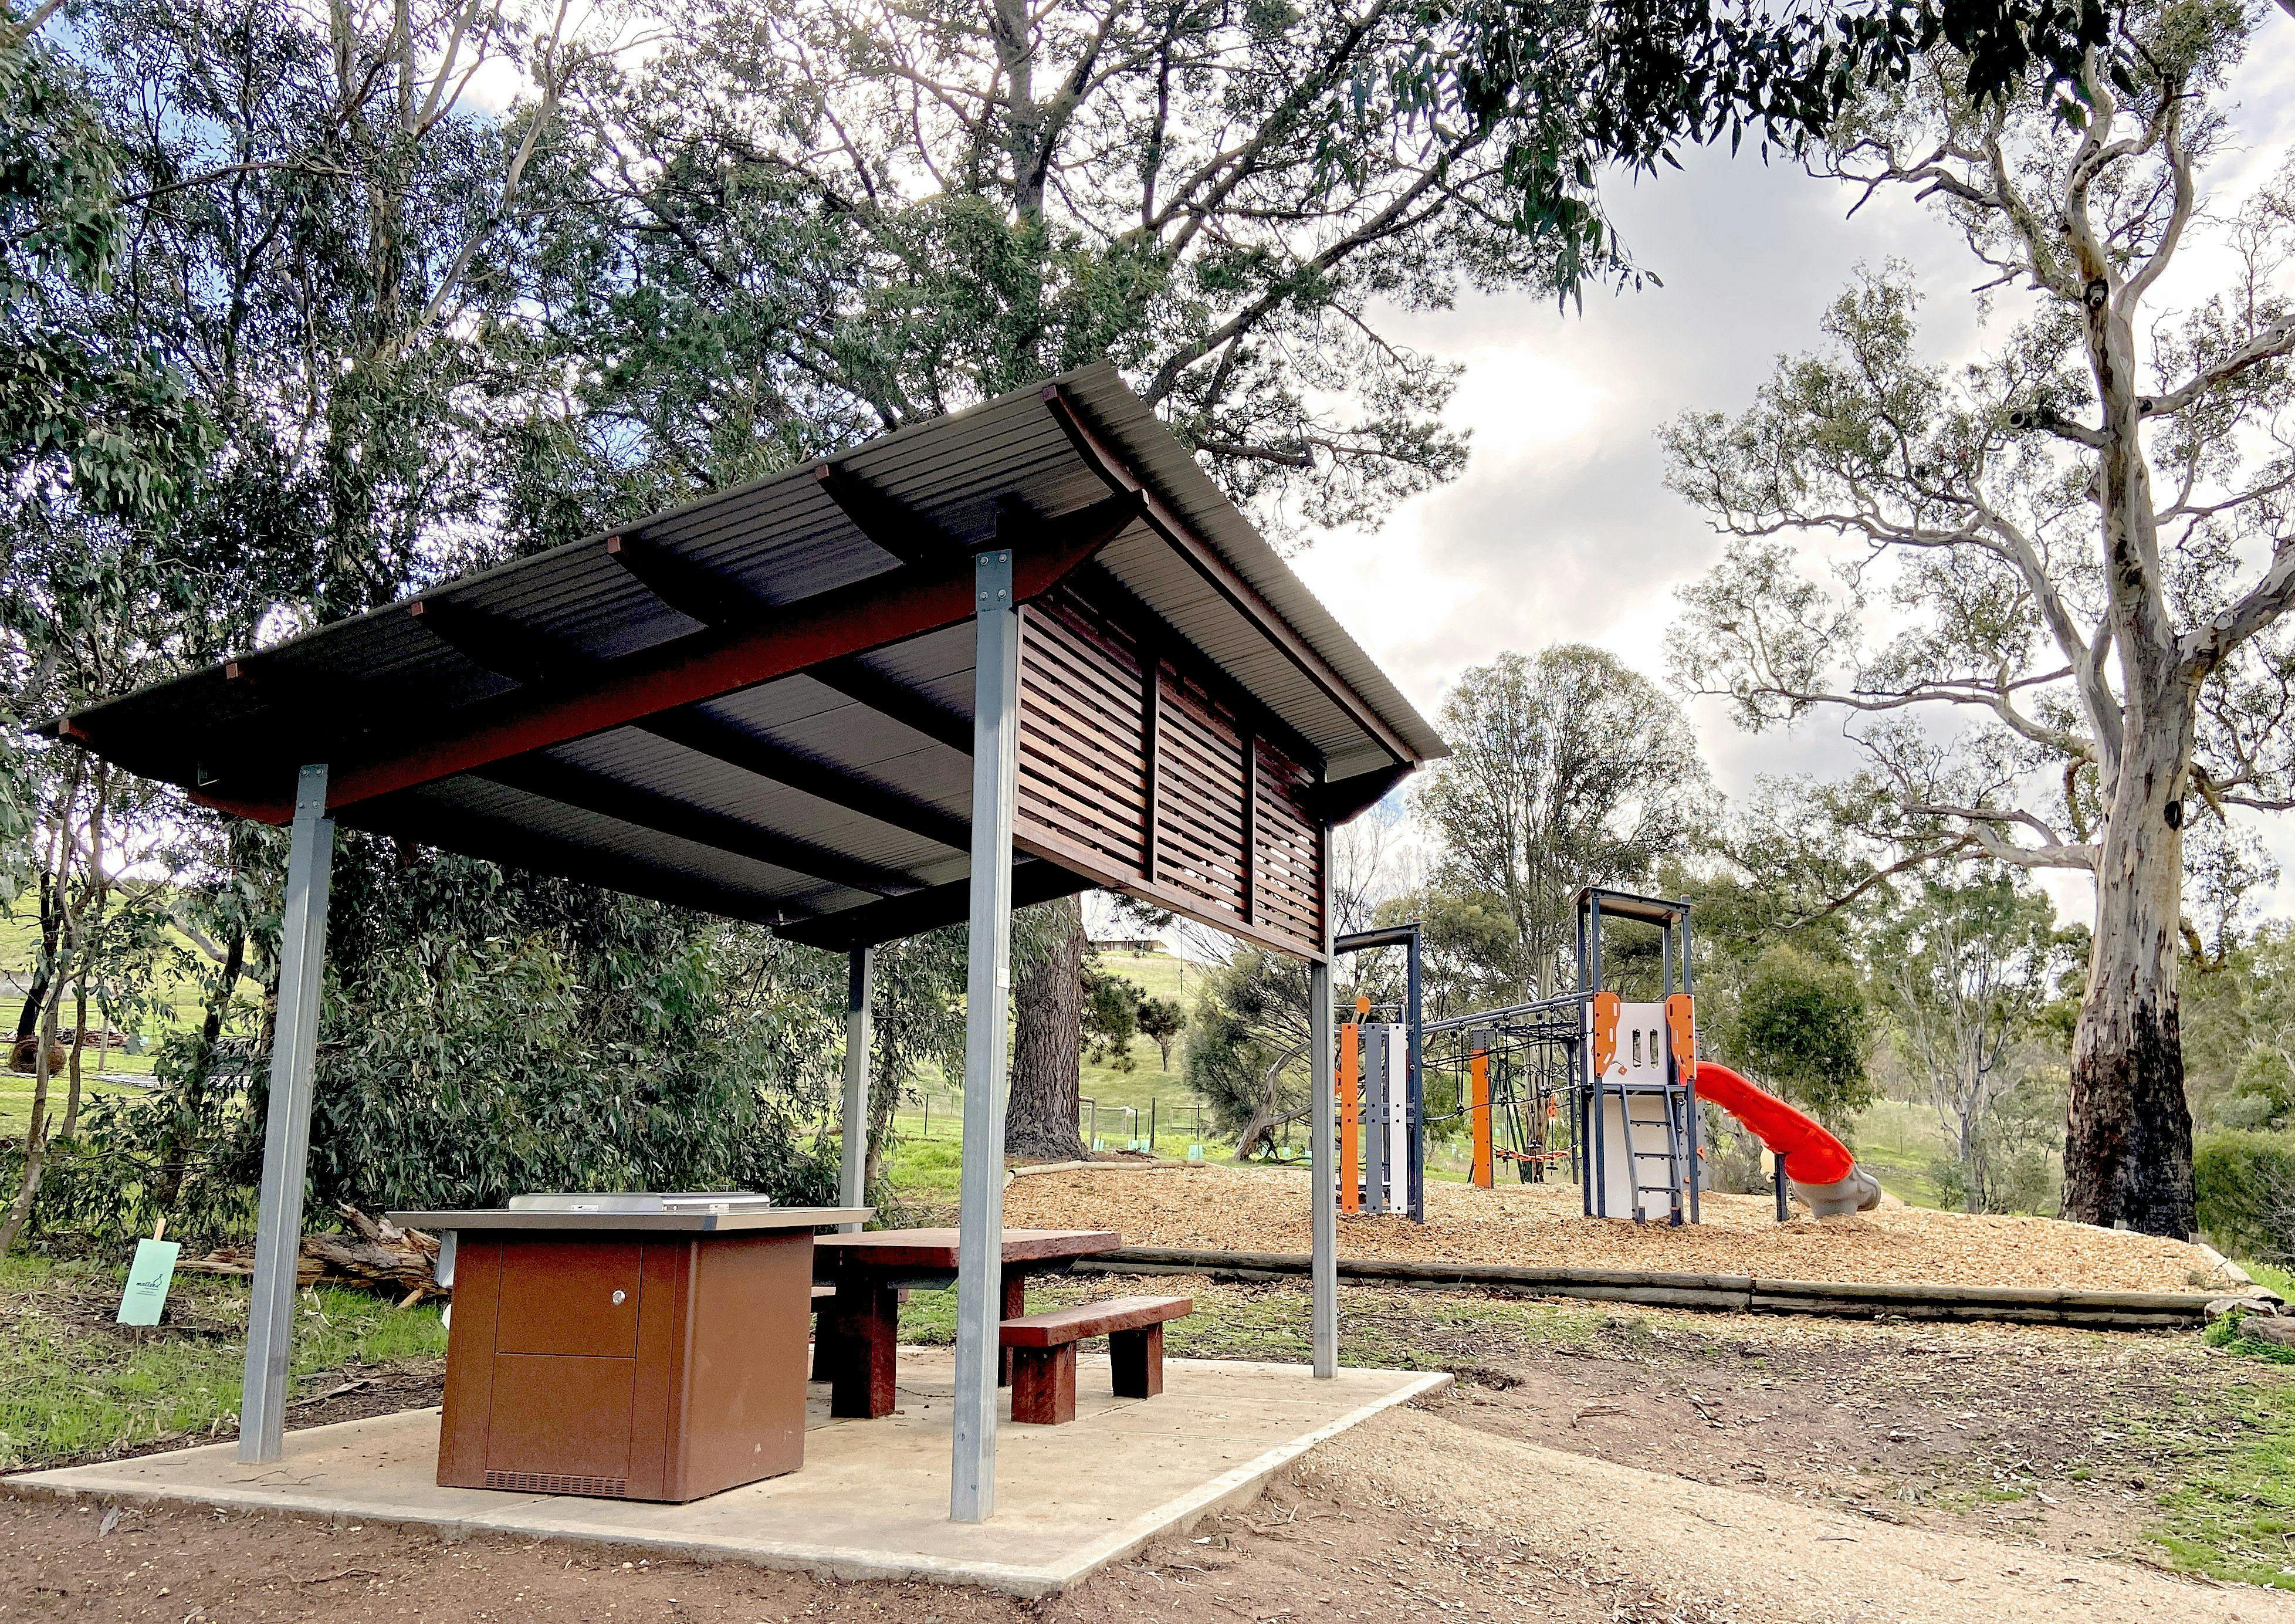 Harrogate Reserve - barbecue, shelter and playground